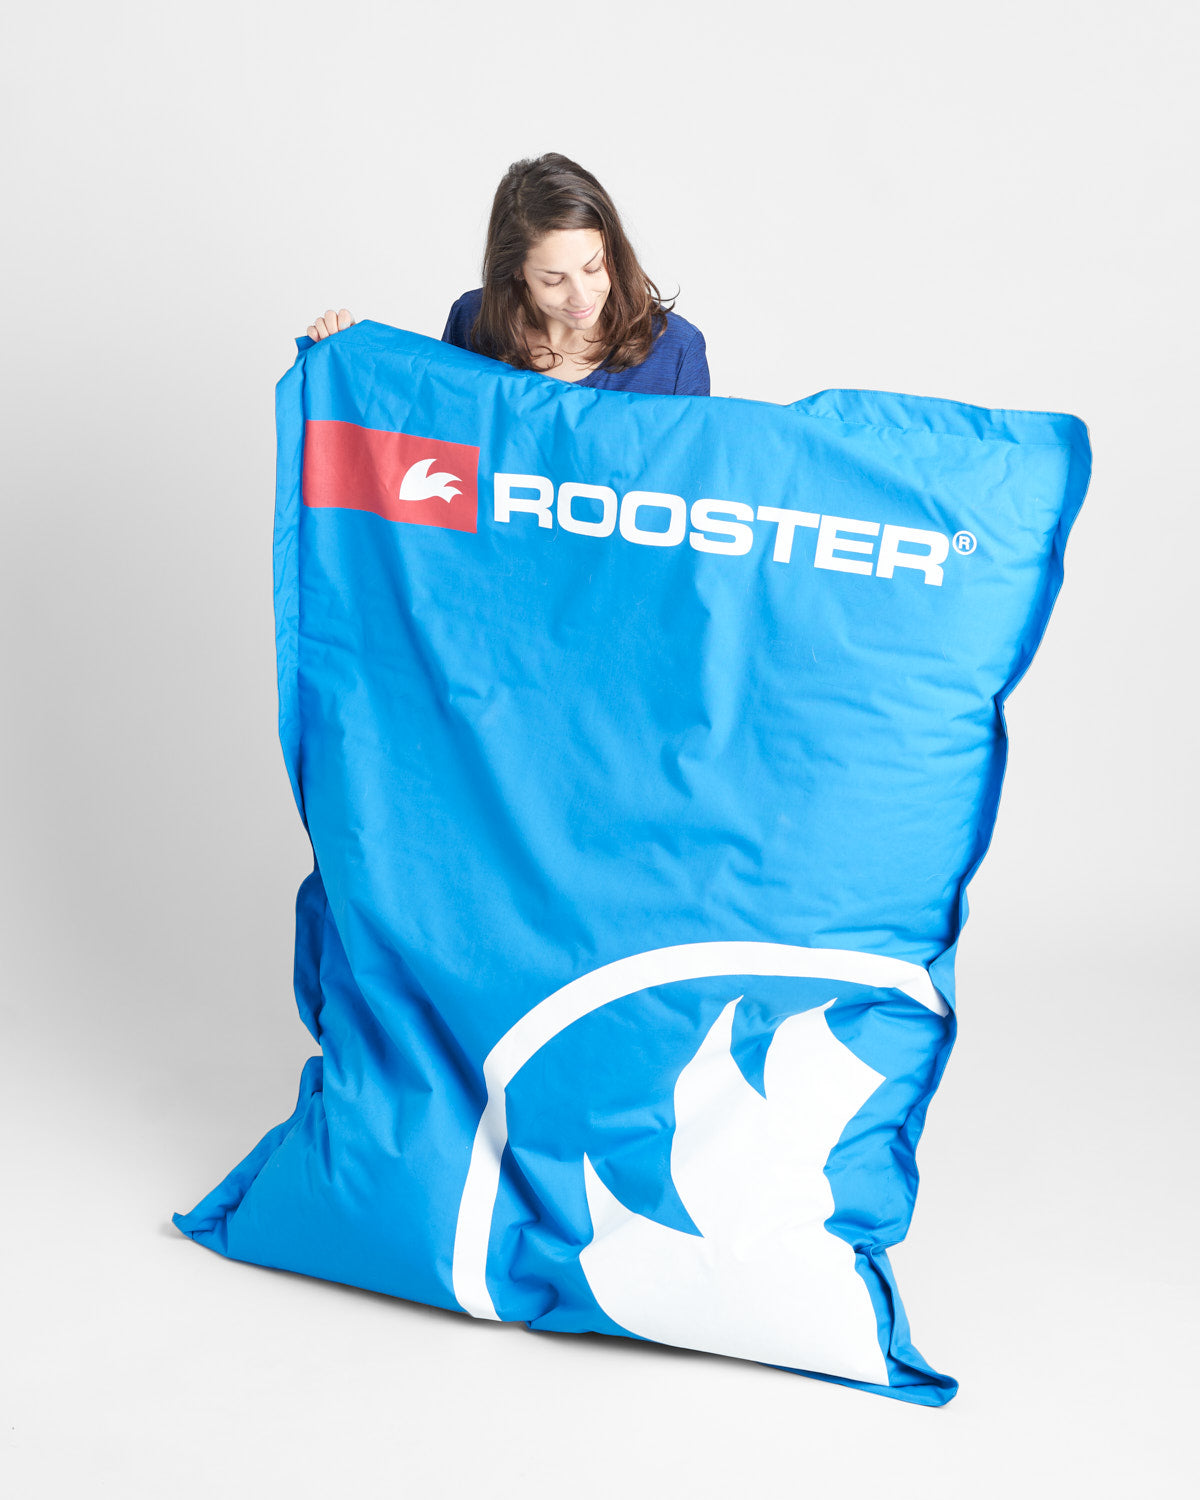 Rooster Bean Bag - XL - (excluding beans)